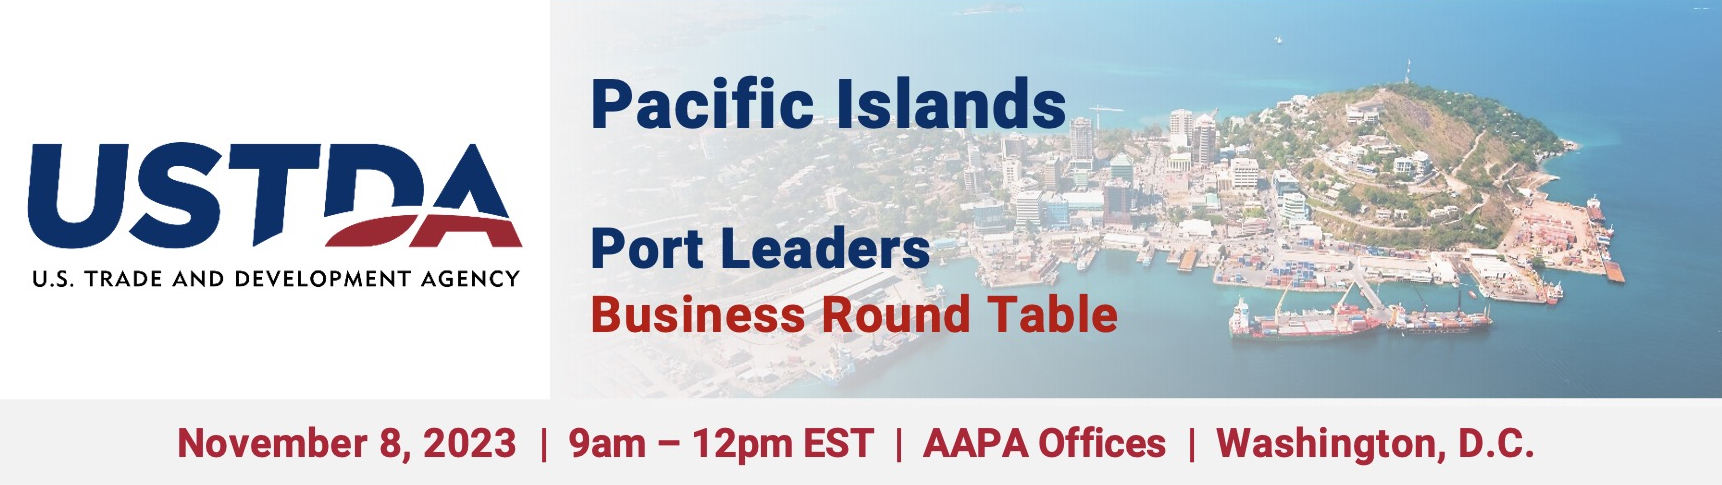 Pacific Islands Port Leaders - Business Round Table